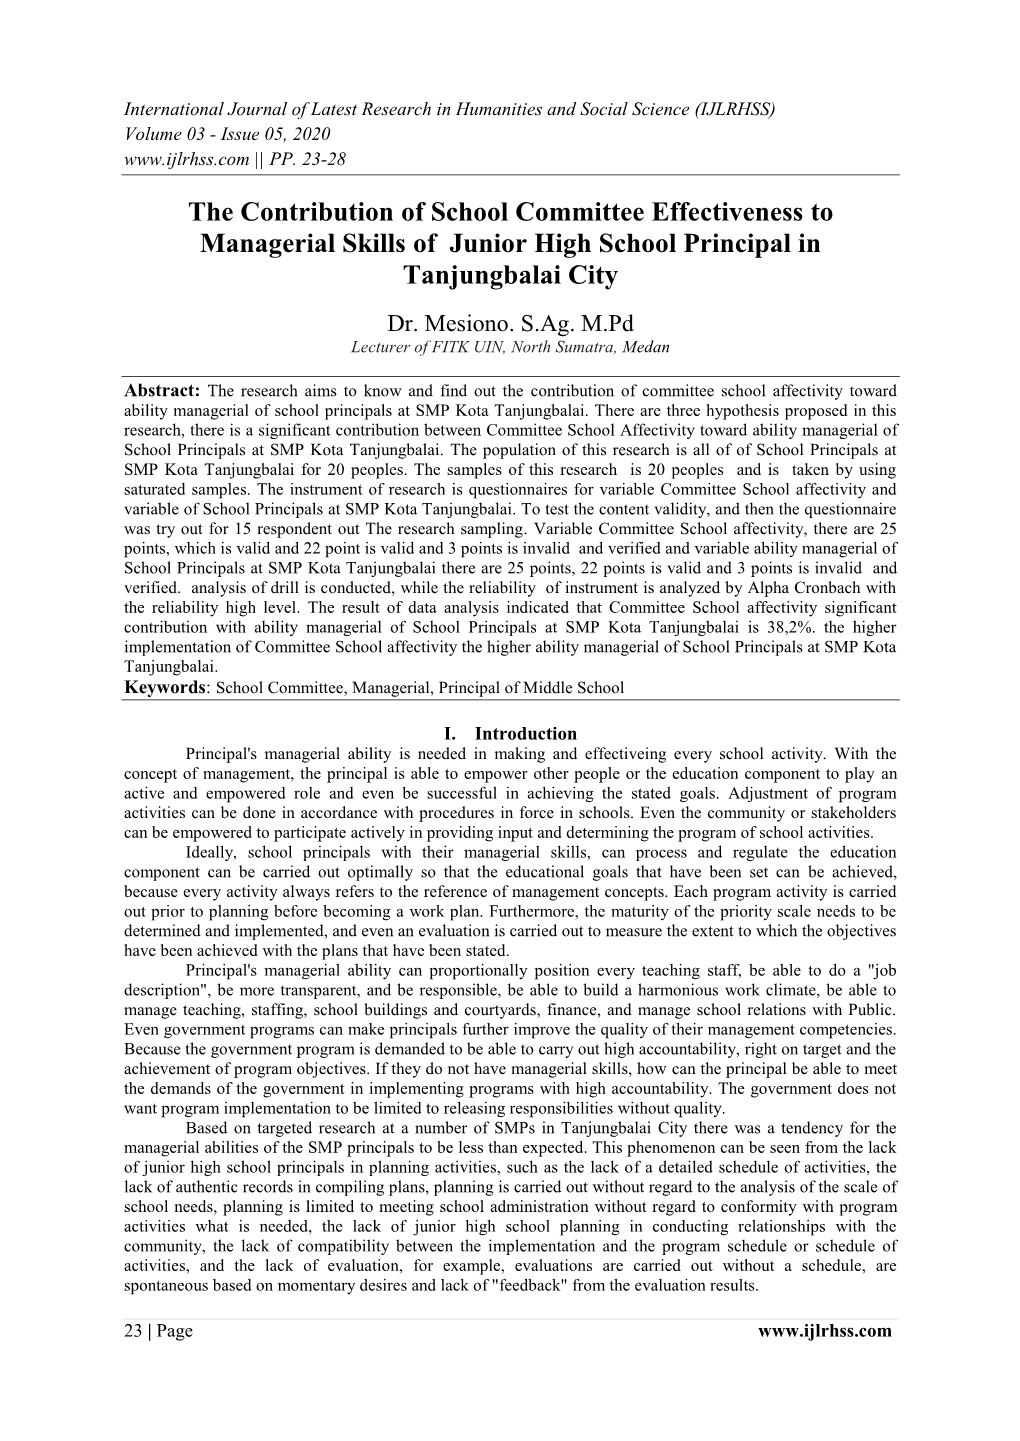 The Contribution of School Committee Effectiveness to Managerial Skills of Junior High School Principal in Tanjungbalai City